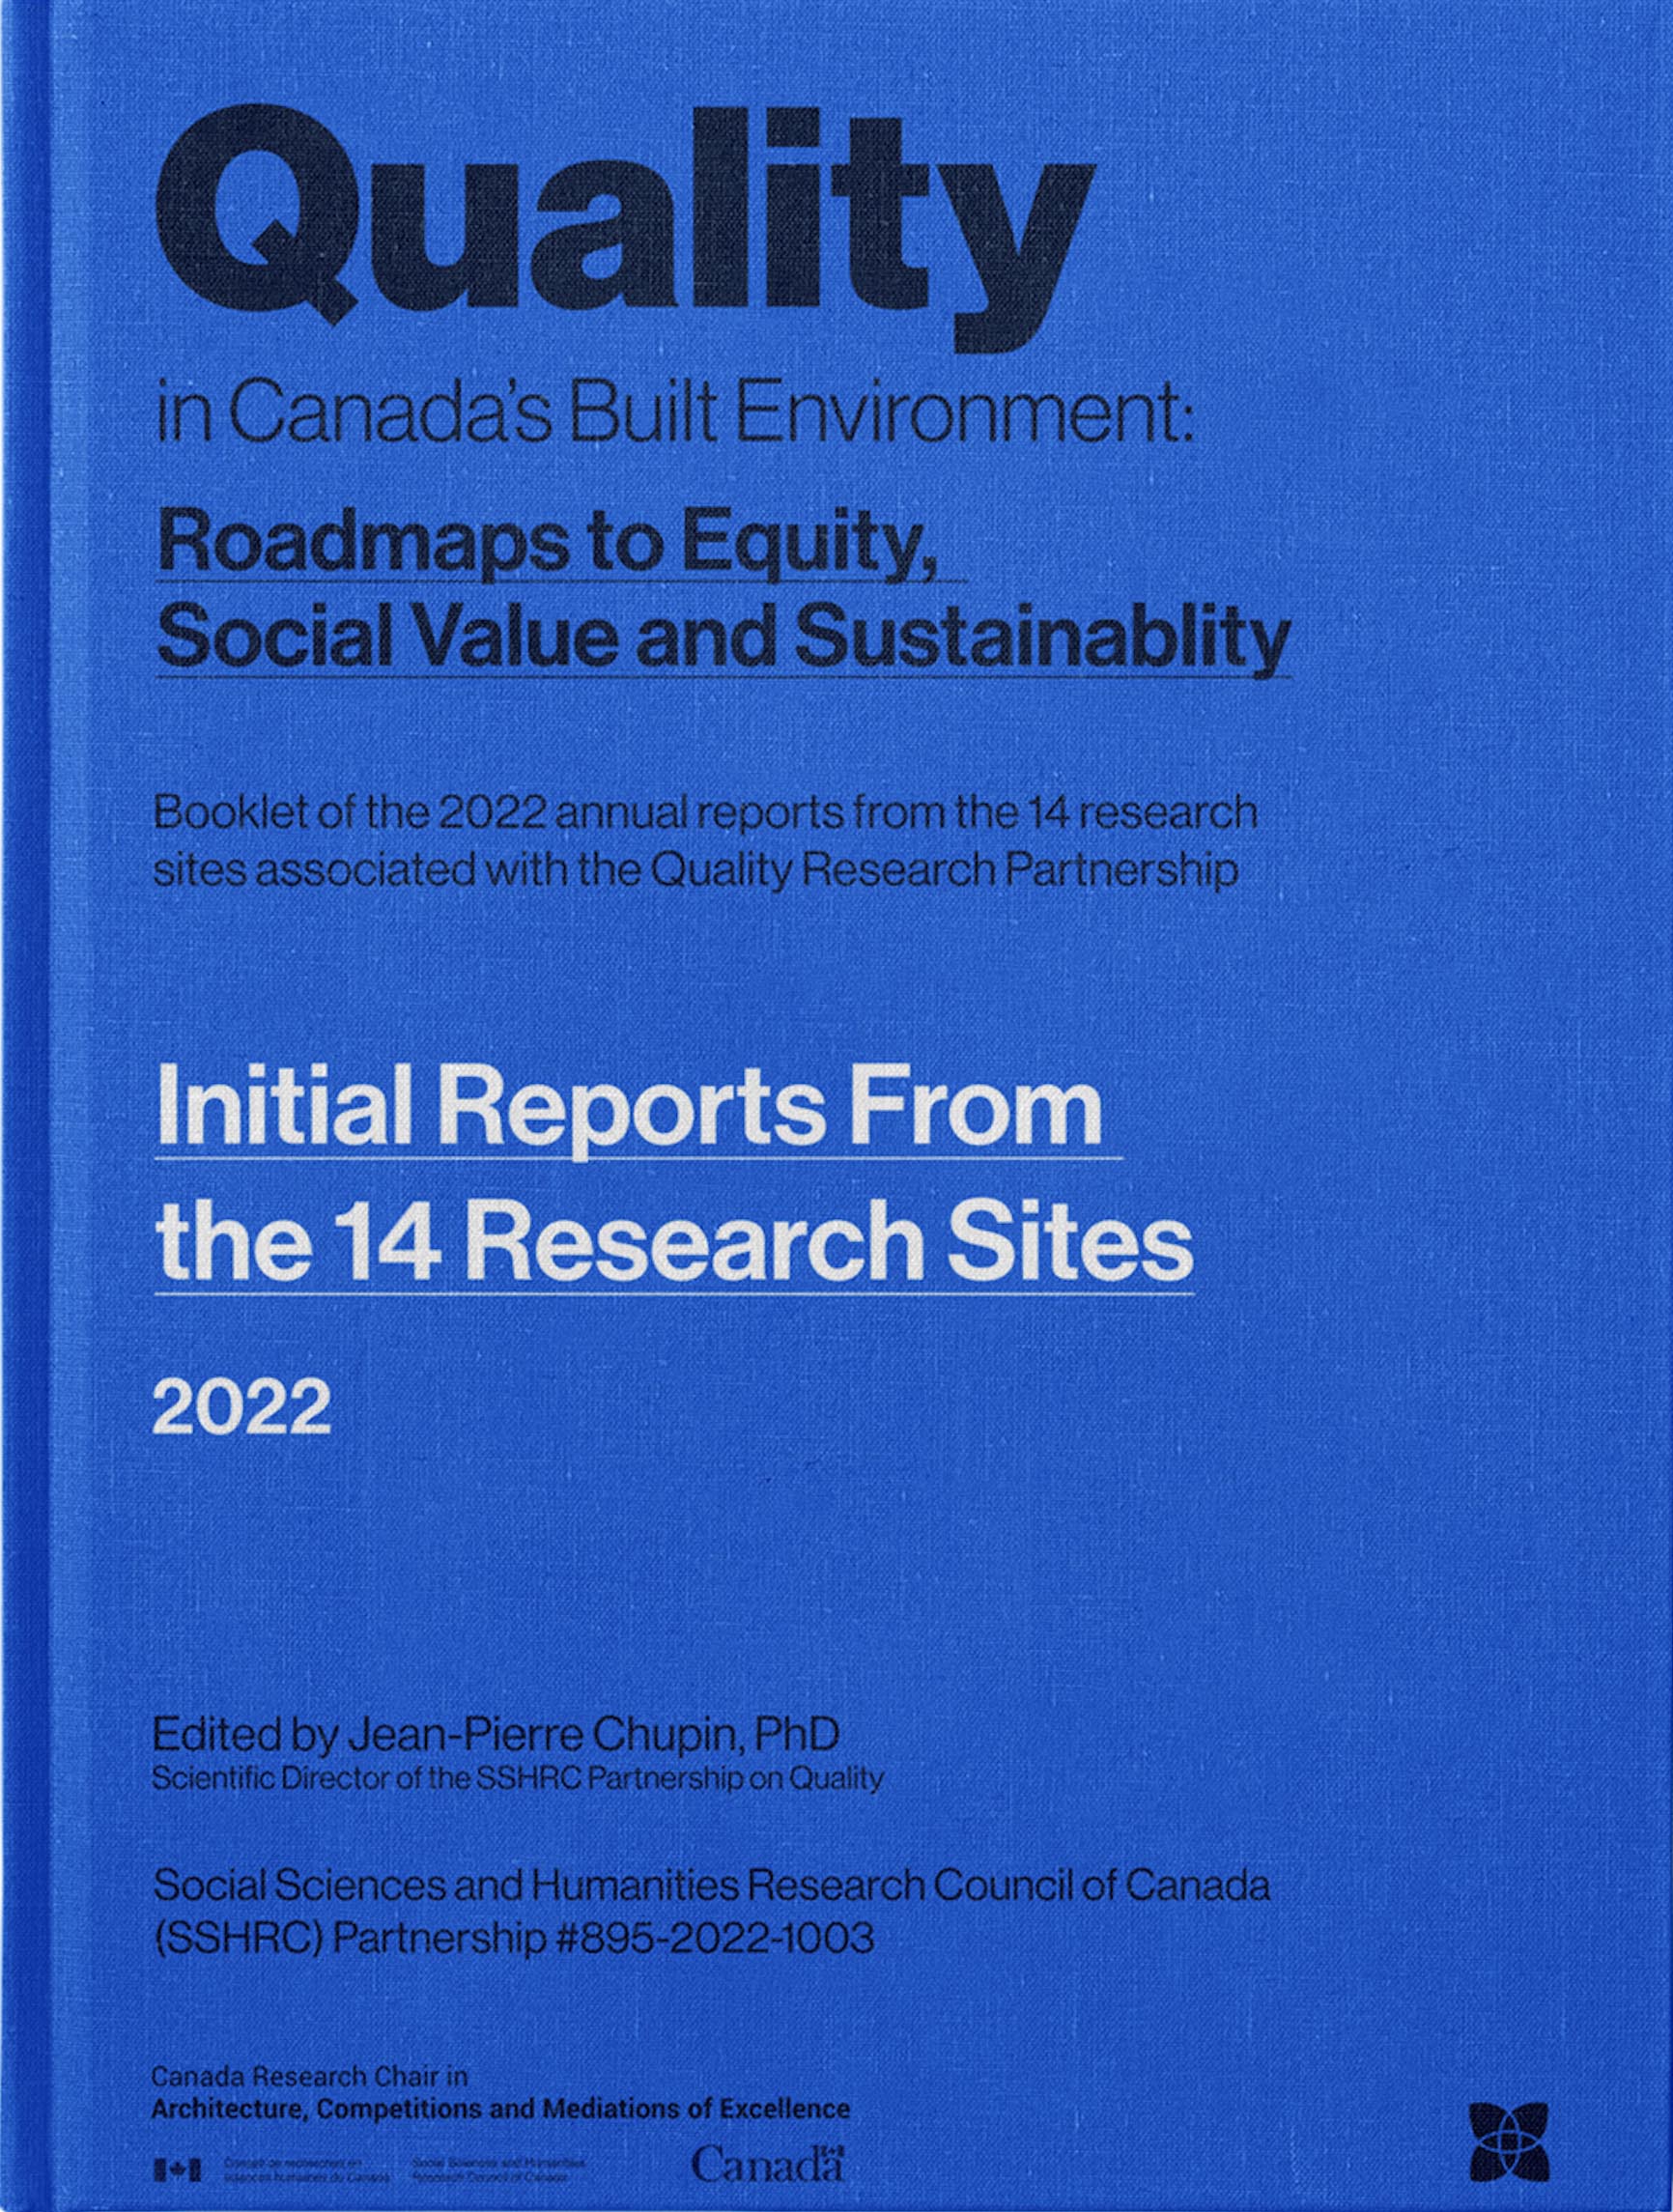 Initial Reports from the 14 Research Sites. SSHRC Research Partnership (#895-2022-1003). Edited by Jean-Pierre Chupin, 2022, Université de Montréal. 56 pages.